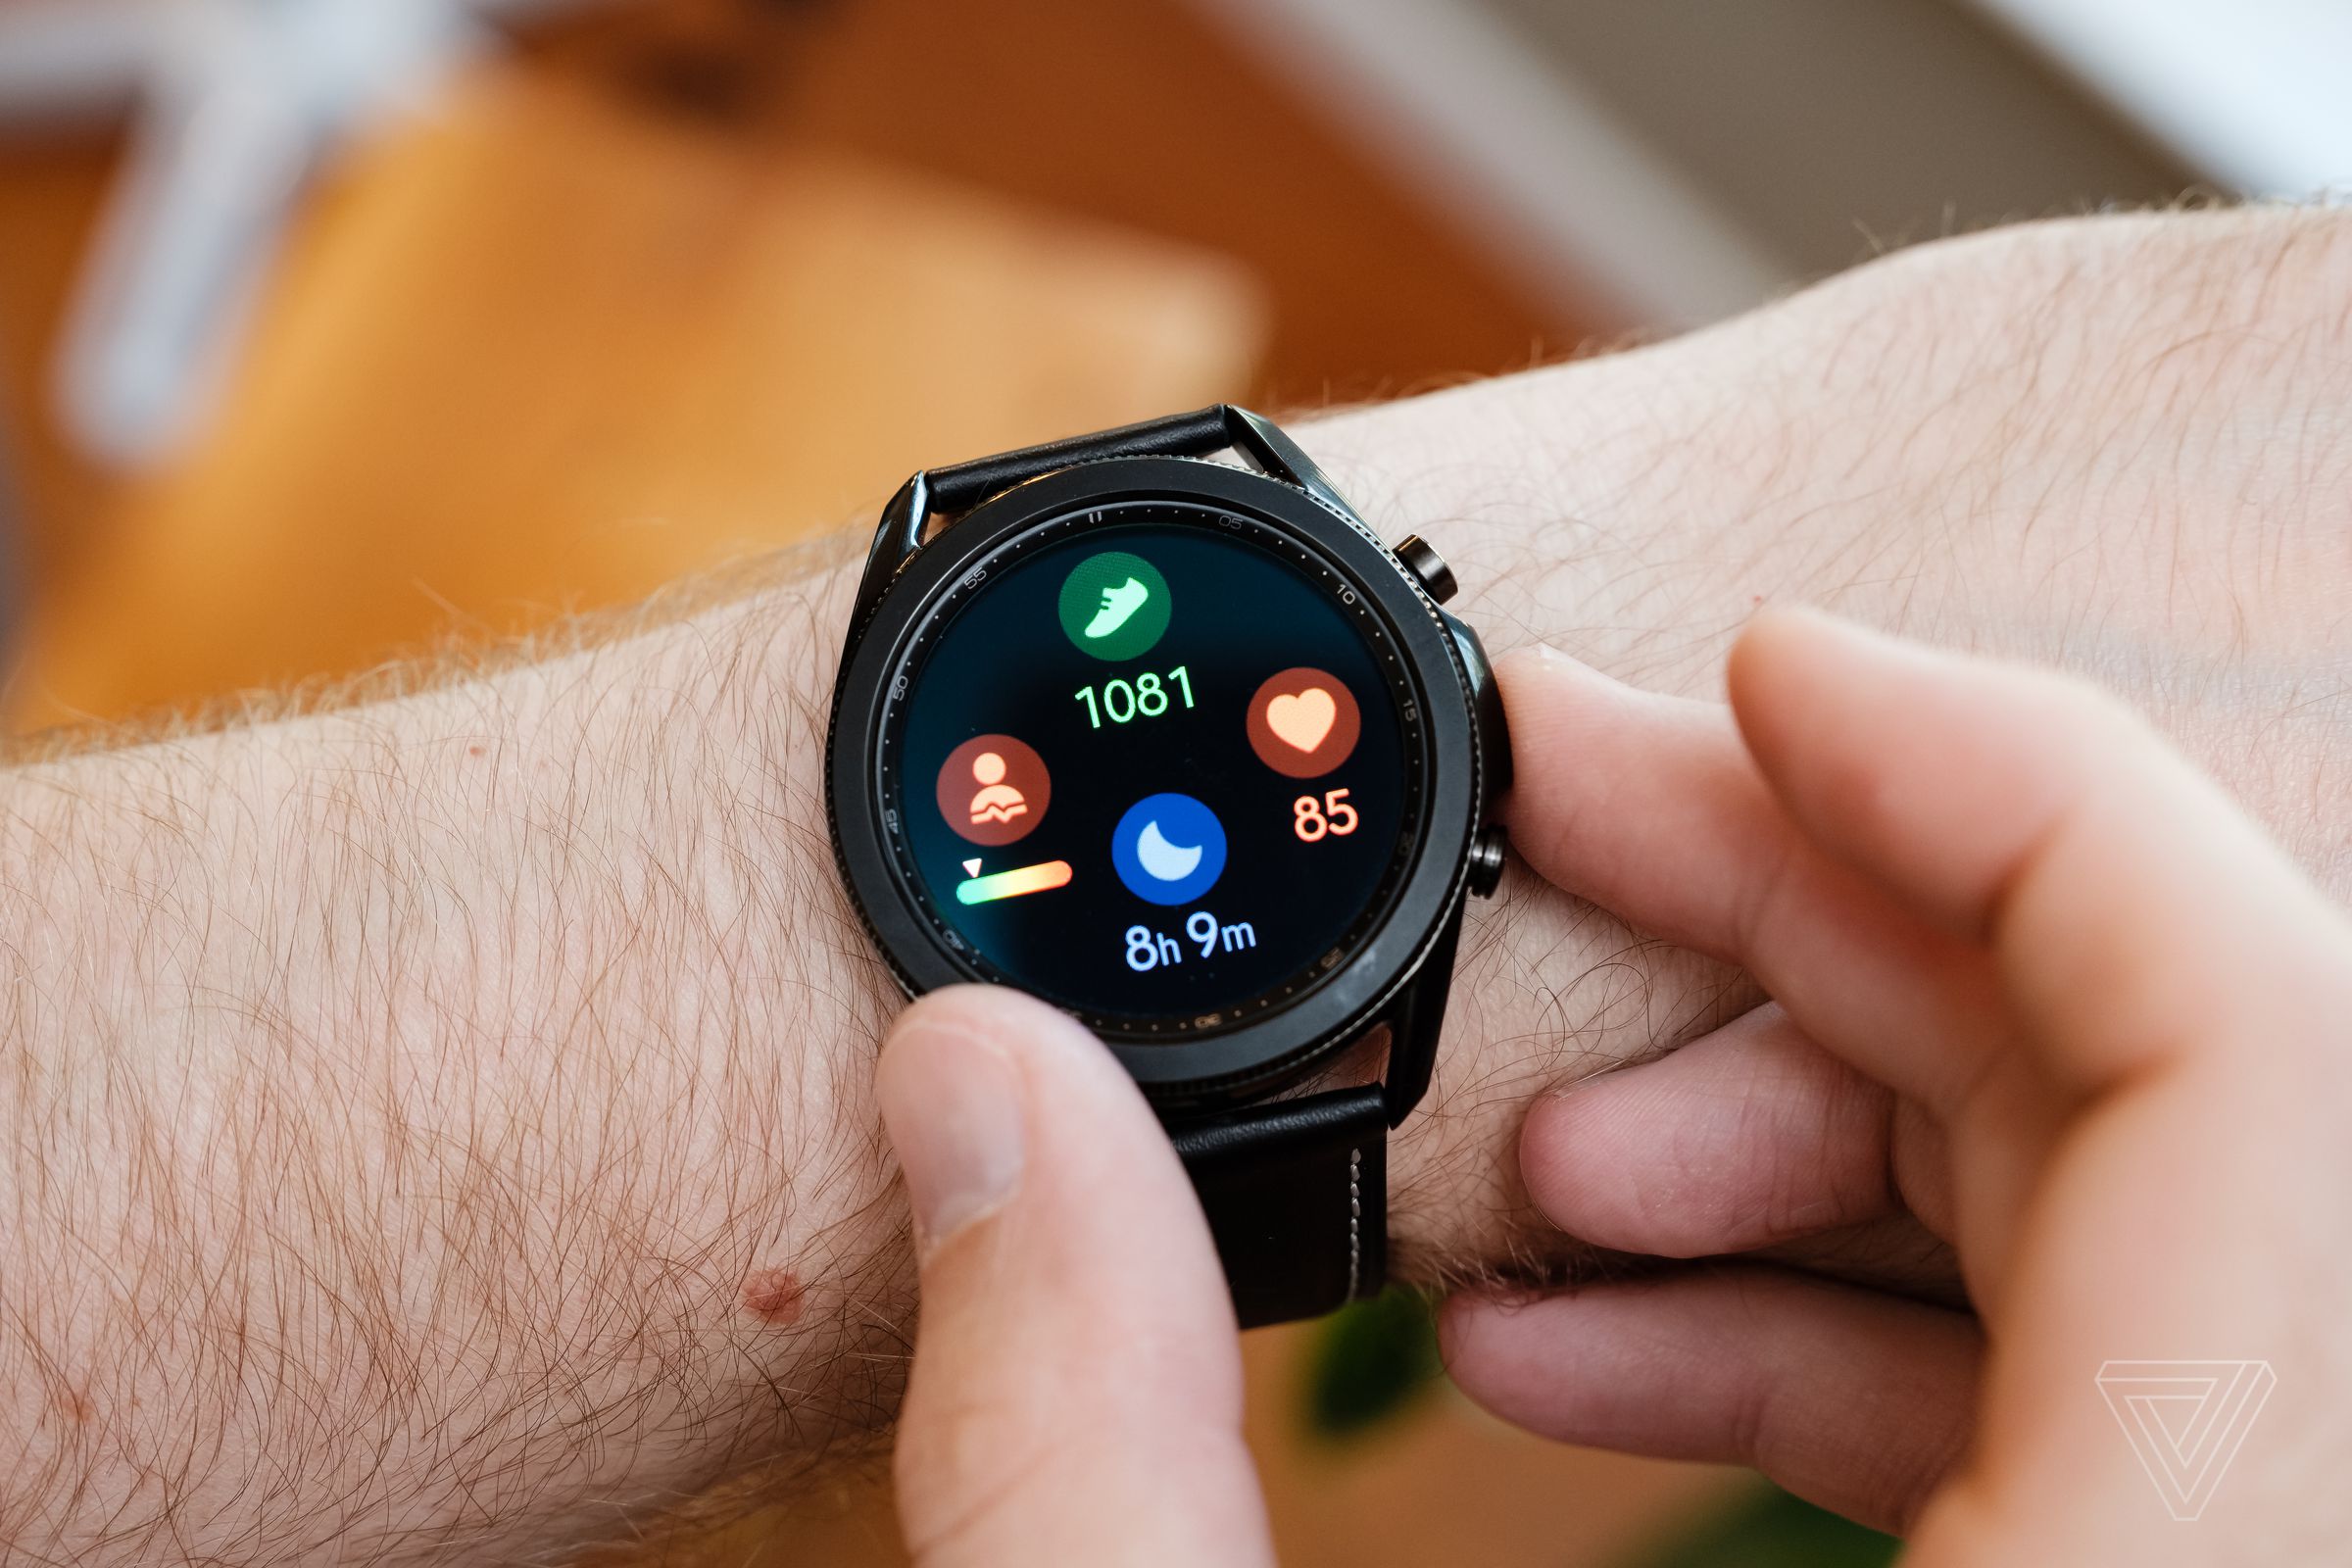 The Watch 3 has some new fitness tracking features.